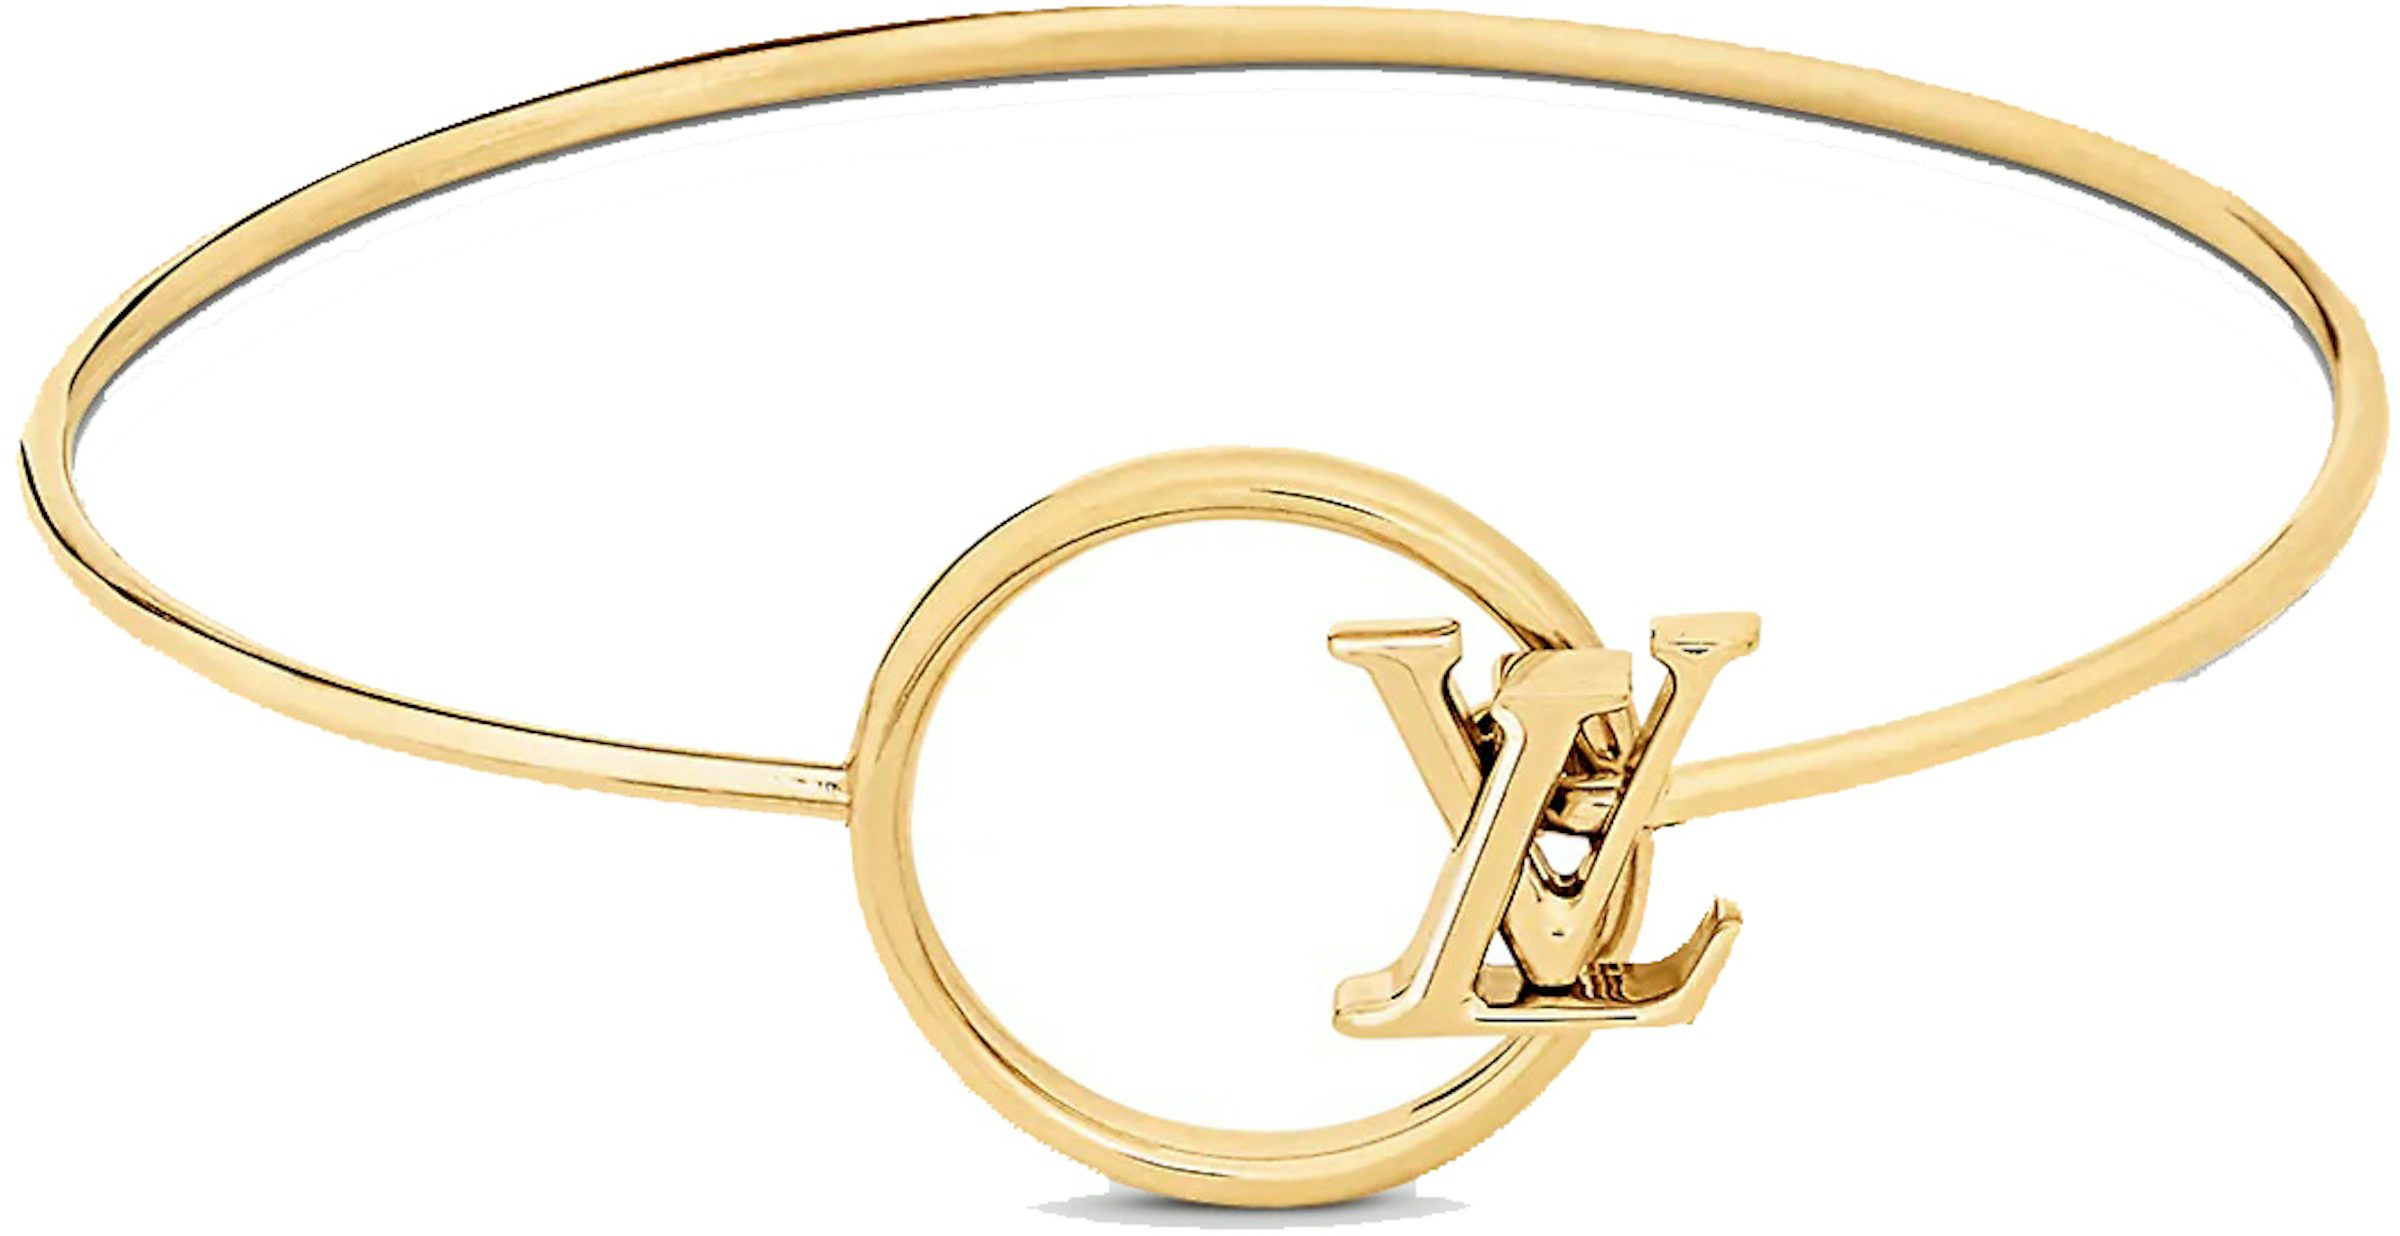 Buy Louis Vuitton Collectors Jewelry Accessories - Color Gold - StockX